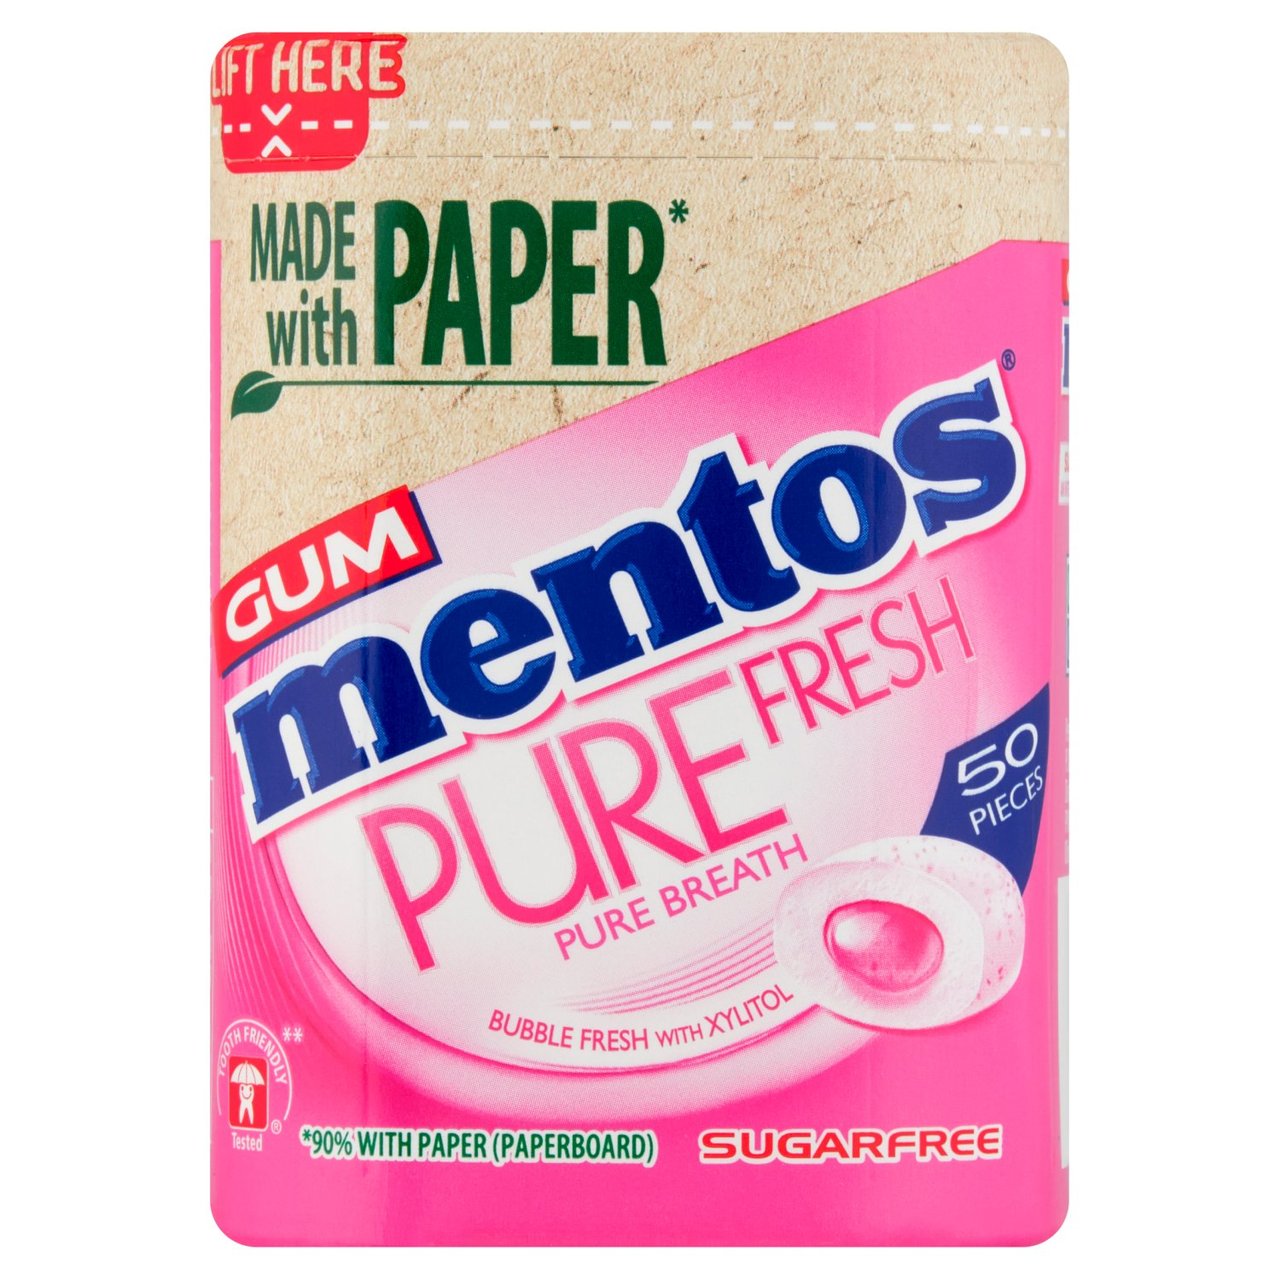 Mentos Fruit Che Wy Sweets 5 X 38 G - Tesco Groceries